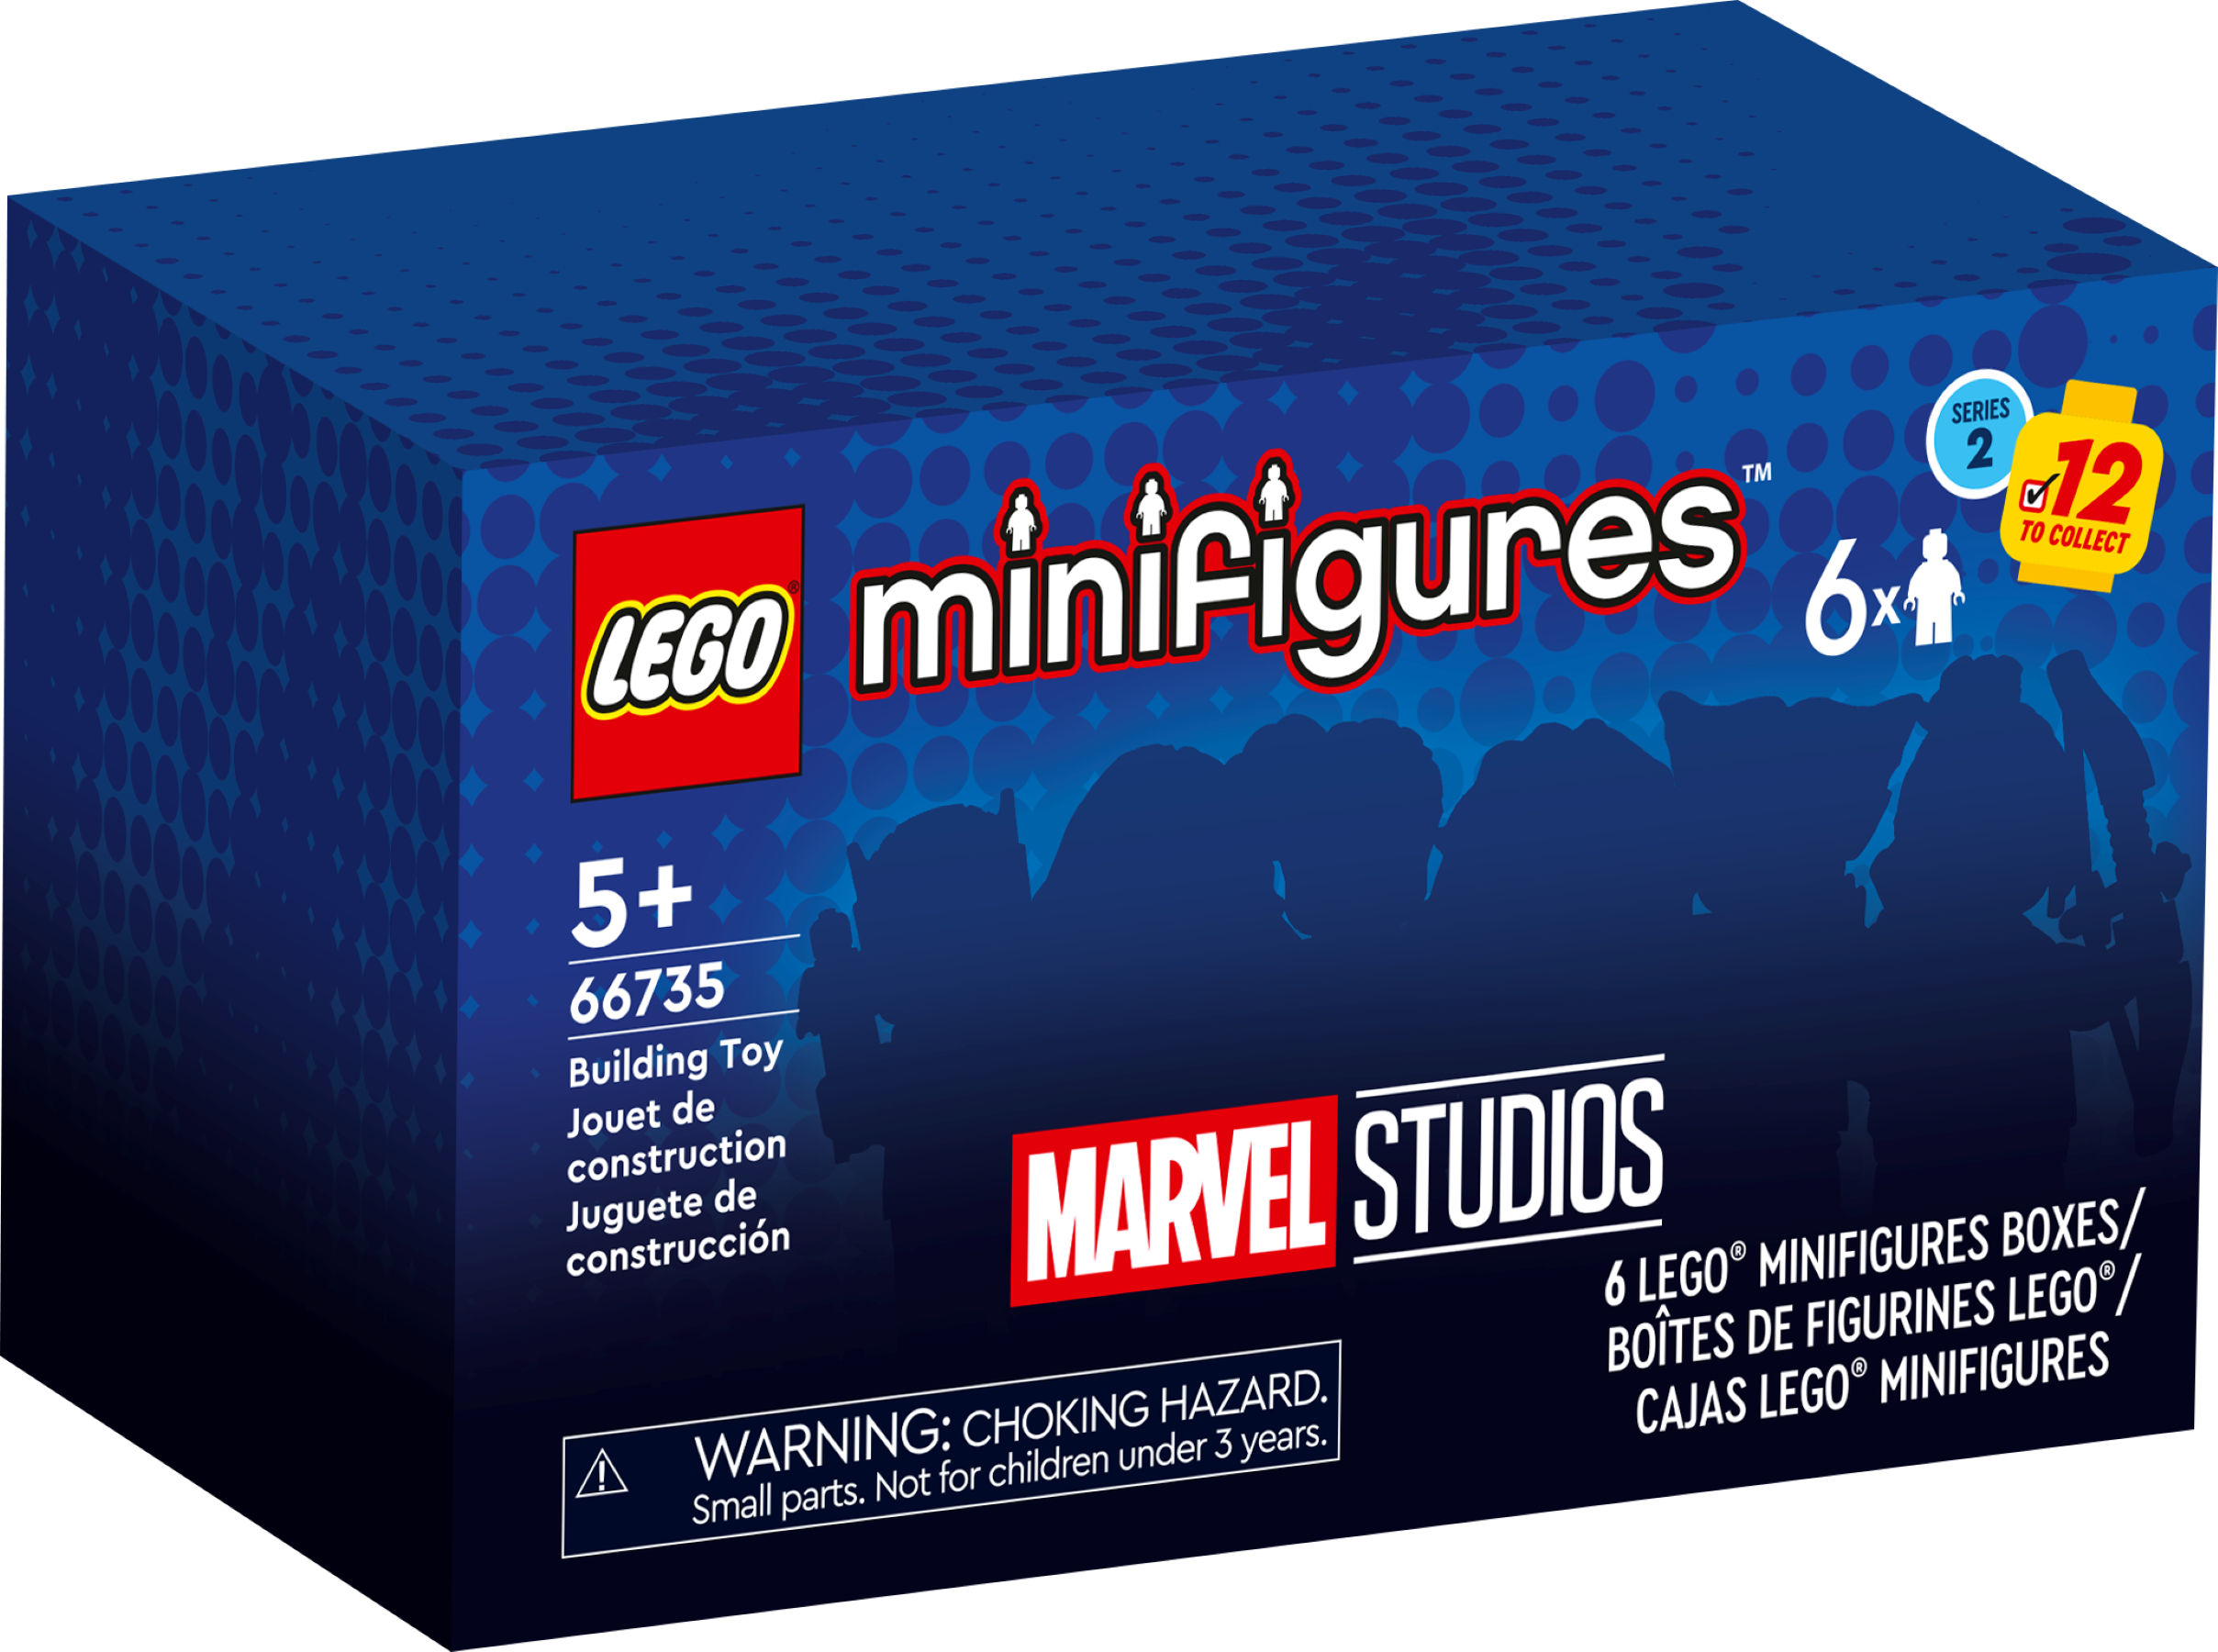 Buy Official LEGO Minifigures, LEGO Super Heroes